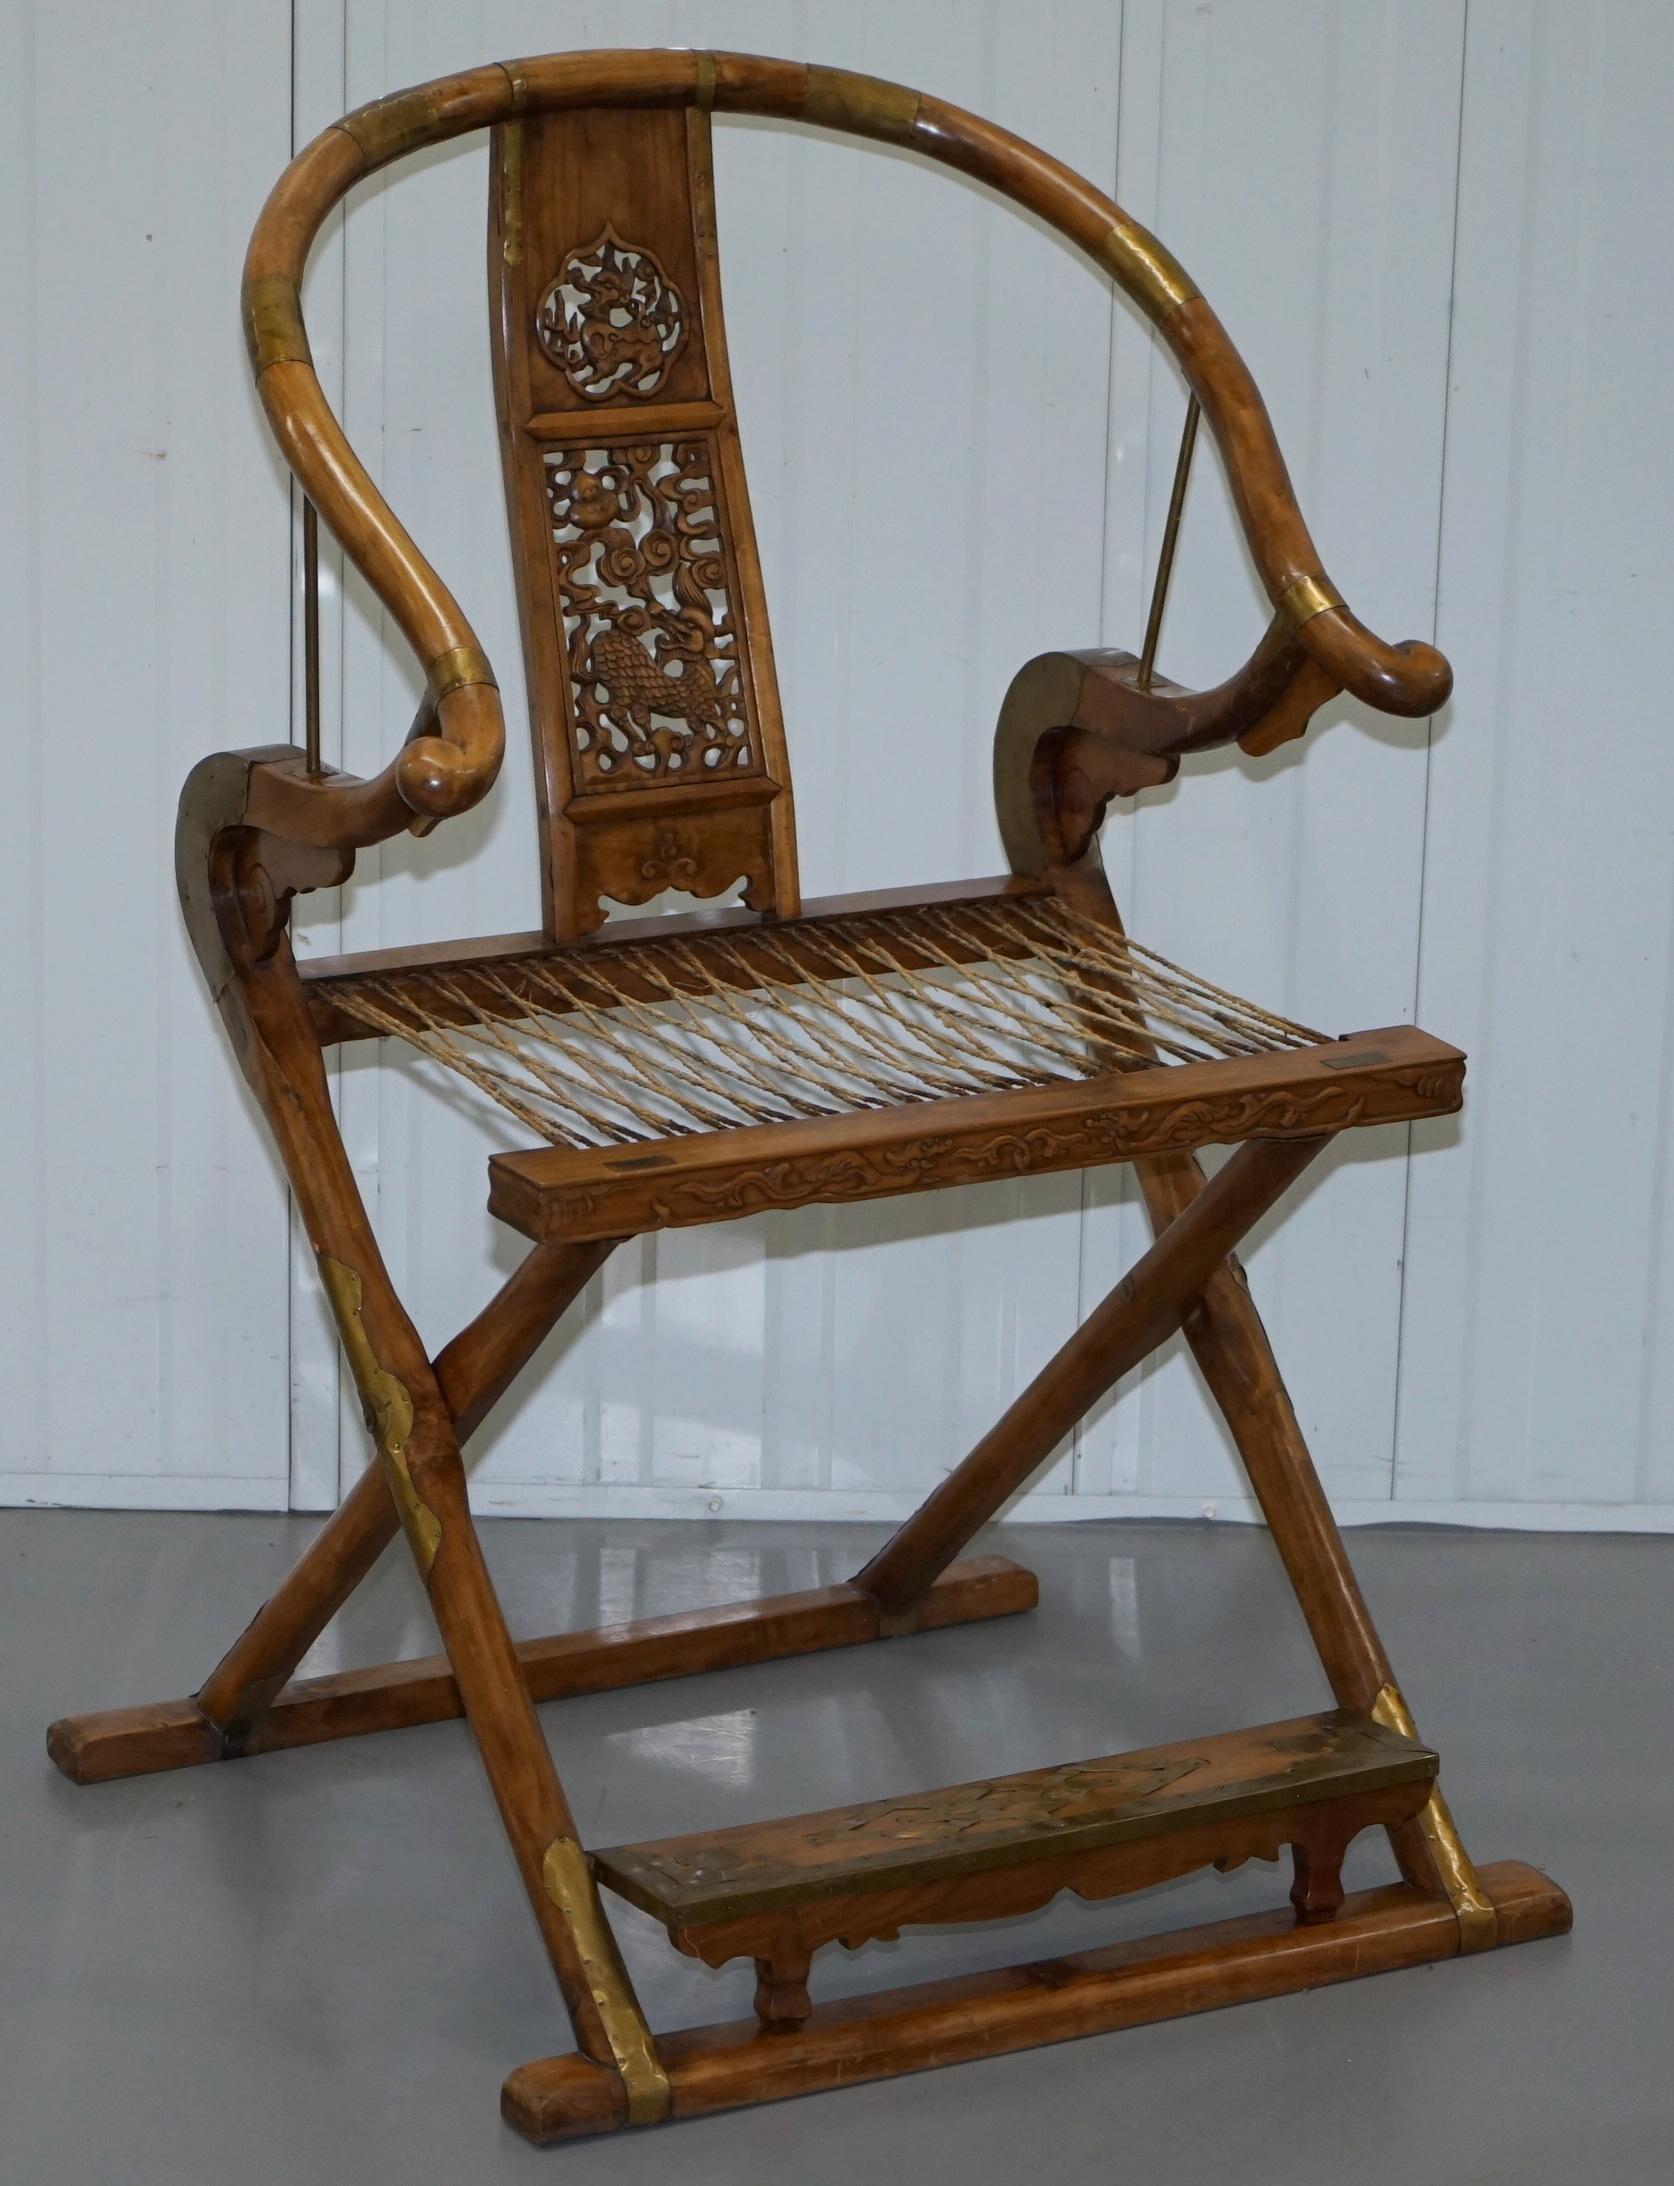 We are delighted to this stunning pair of large decorative vintage Chinese horseshoe back folding chairs

A very good looking and decorative pair of high chairs, these look to be of a similar stature to a throne chair, they are much larger than